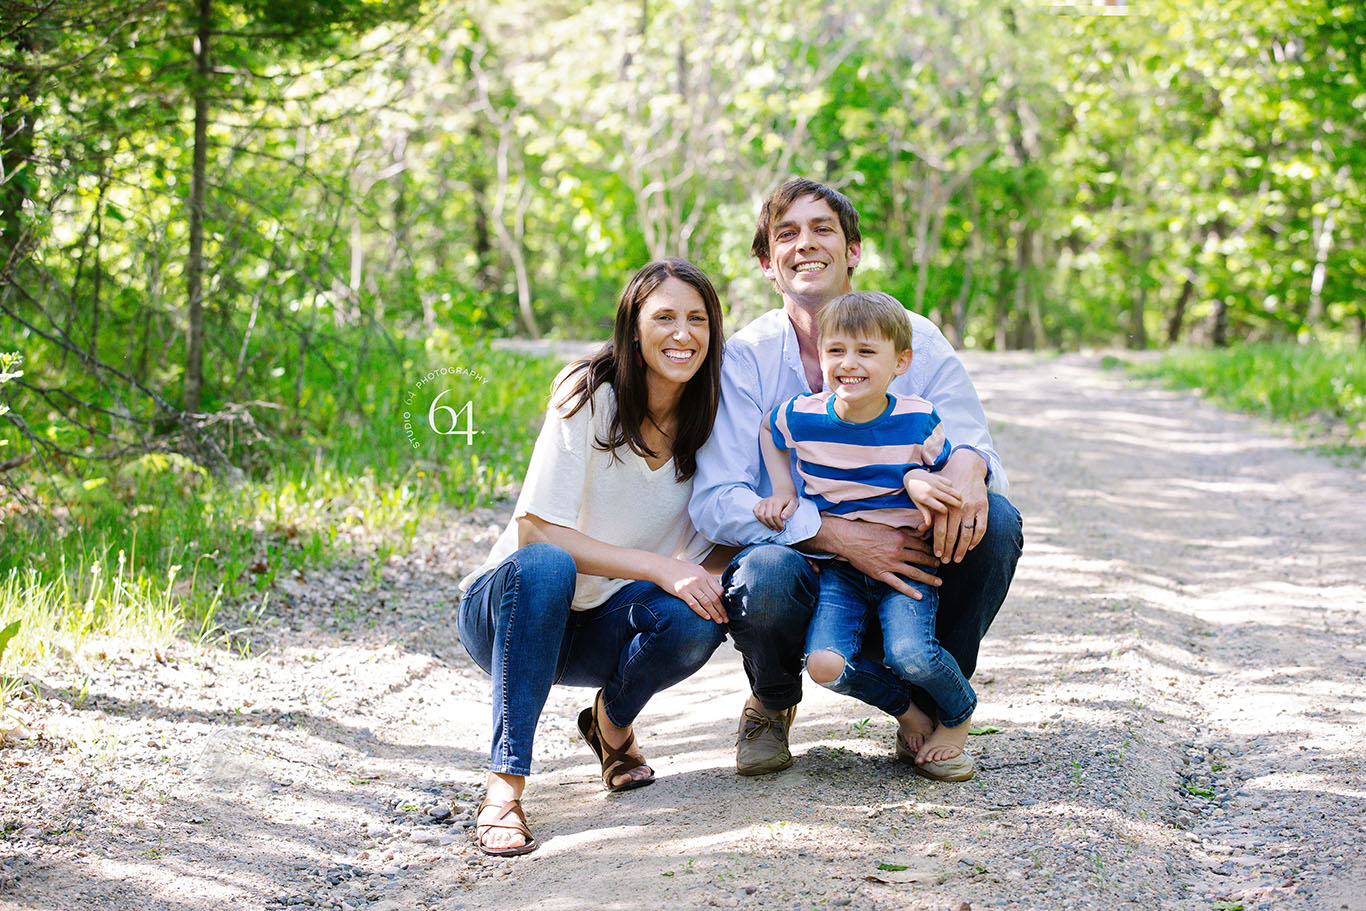 Family of 3 outdoors in the summer time squatting down on a gravel road with big smiles.